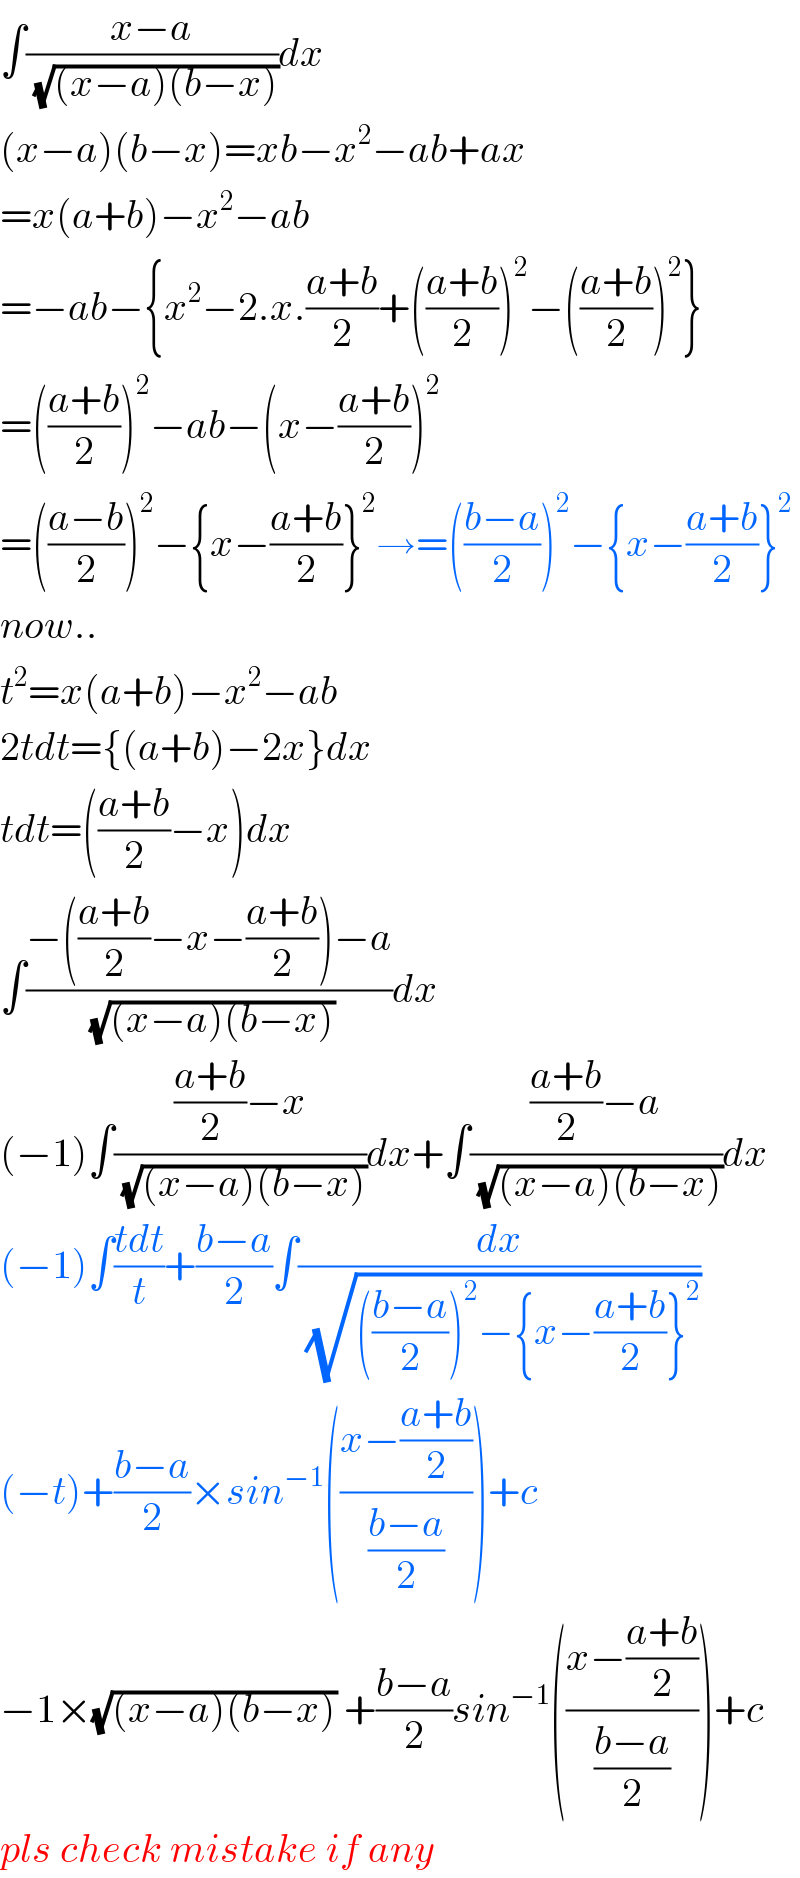 ∫((x−a)/( (√((x−a)(b−x)))))dx  (x−a)(b−x)=xb−x^2 −ab+ax  =x(a+b)−x^2 −ab  =−ab−{x^2 −2.x.((a+b)/2)+(((a+b)/2))^2 −(((a+b)/2))^2 }  =(((a+b)/2))^2 −ab−(x−((a+b)/2))^2   =(((a−b)/2))^2 −{x−((a+b)/2)}^2 →=(((b−a)/2))^2 −{x−((a+b)/2)}^2   now..  t^2 =x(a+b)−x^2 −ab  2tdt={(a+b)−2x}dx  tdt=(((a+b)/2)−x)dx  ∫((−(((a+b)/2)−x−((a+b)/2))−a)/( (√((x−a)(b−x)))))dx  (−1)∫((((a+b)/2)−x)/( (√((x−a)(b−x)))))dx+∫((((a+b)/2)−a)/( (√((x−a)(b−x)))))dx  (−1)∫((tdt)/t)+((b−a)/2)∫(dx/( (√((((b−a)/2))^2 −{x−((a+b)/2)}^2 ))))  (−t)+((b−a)/2)×sin^(−1) (((x−((a+b)/2))/((b−a)/2)))+c  −1×(√((x−a)(b−x))) +((b−a)/2)sin^(−1) (((x−((a+b)/2))/((b−a)/2)))+c  pls check mistake if any  